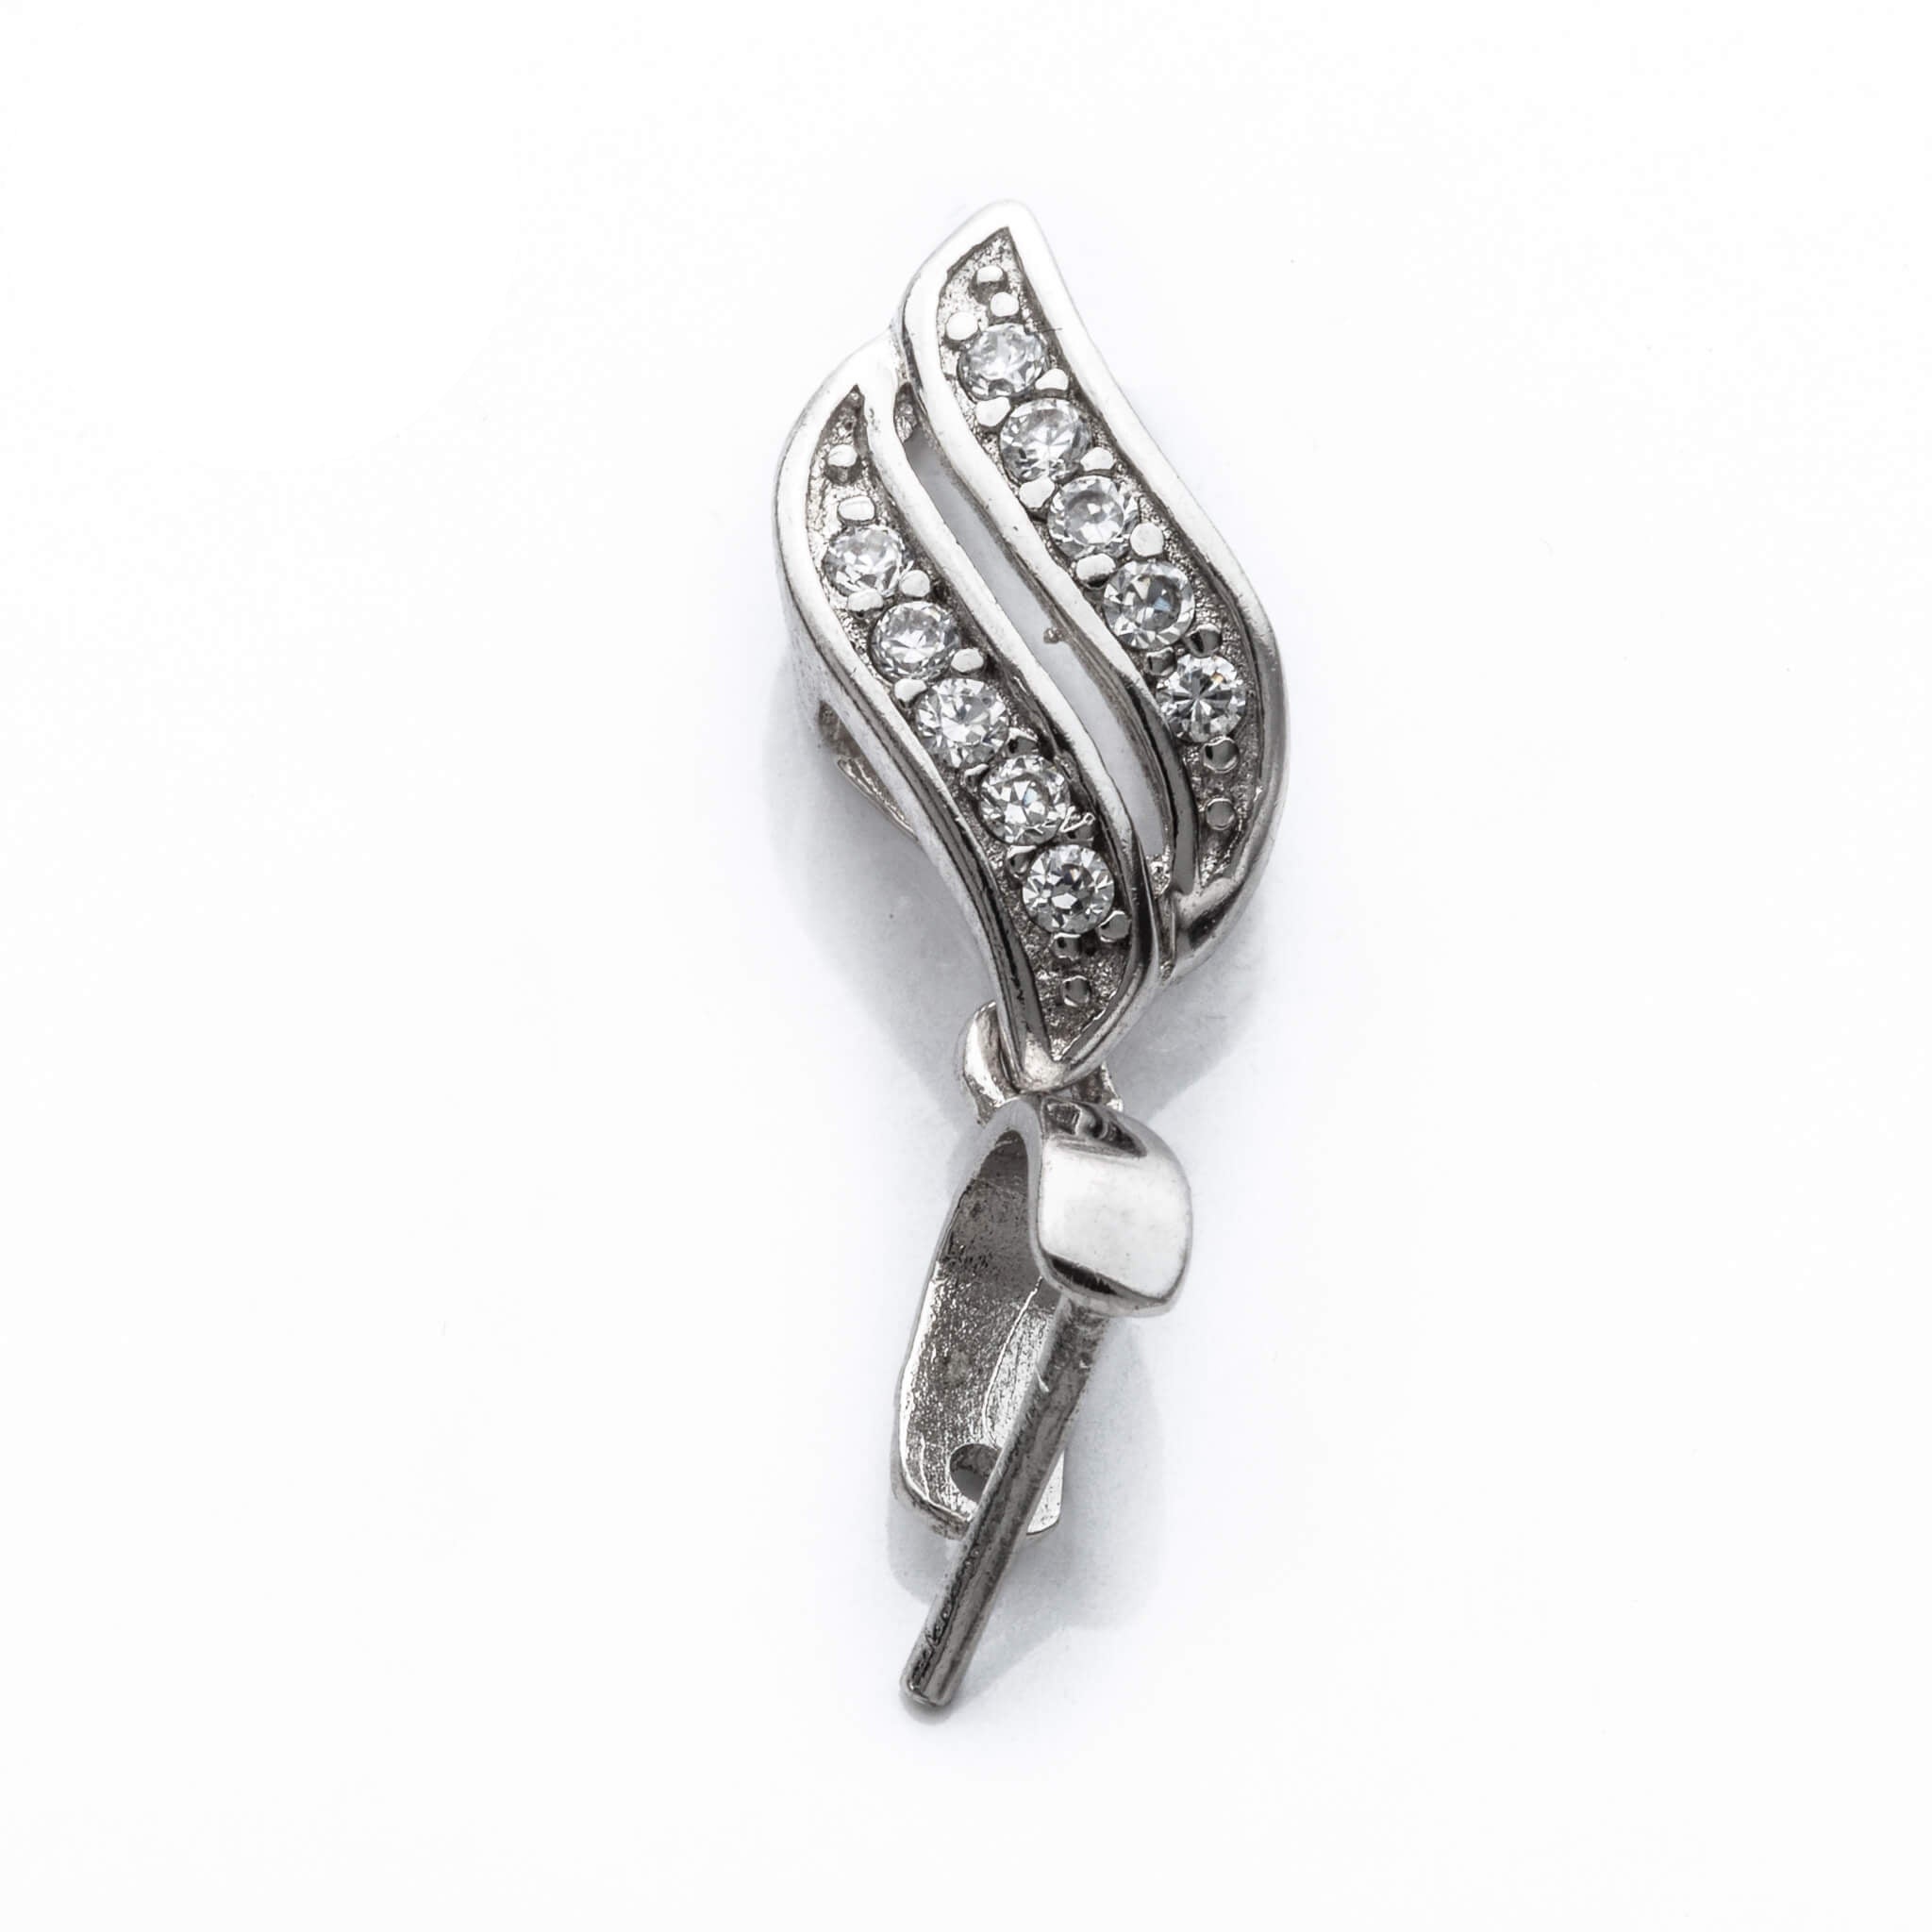 Marquis Pinch Bail with Cubic Zirconia Inlays in Sterling Silver 21x6.6x2.6mm